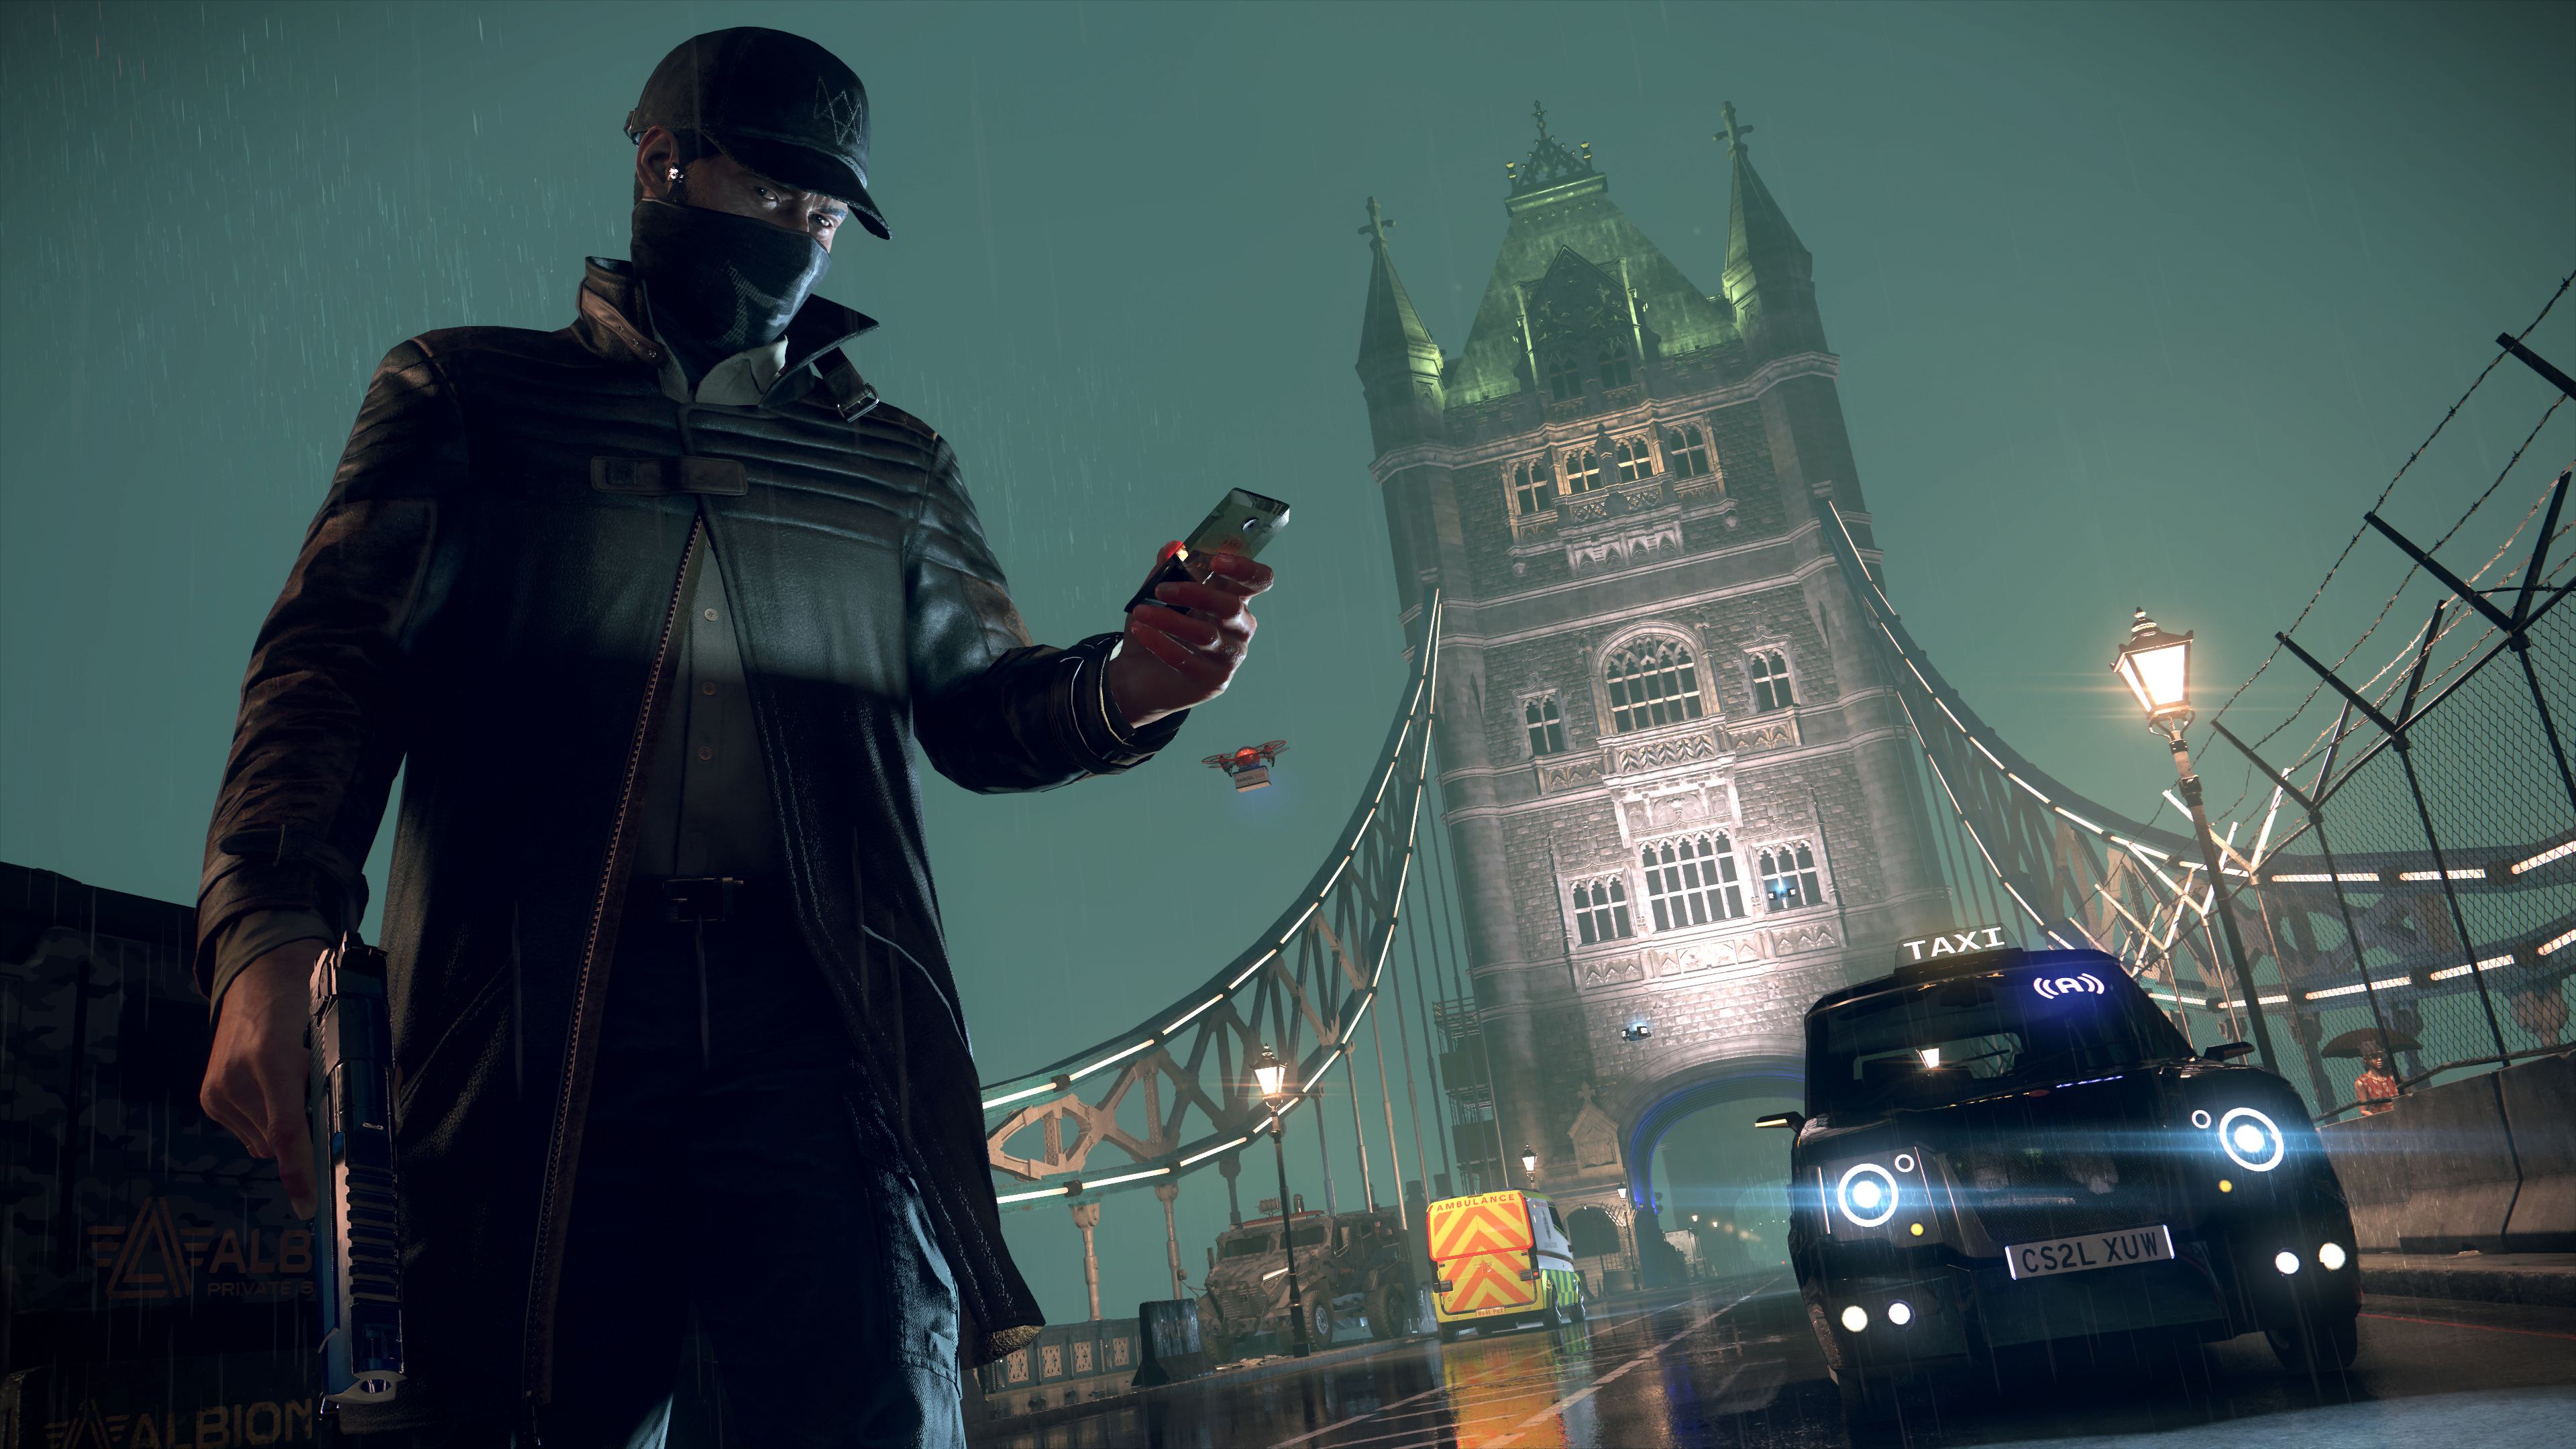 1280x1024 Watch Dogs Legion Recruits 1280x1024 Resolution Wallpaper Hd Games 4k Wallpapers Images Photos And Background Wallpapers Den